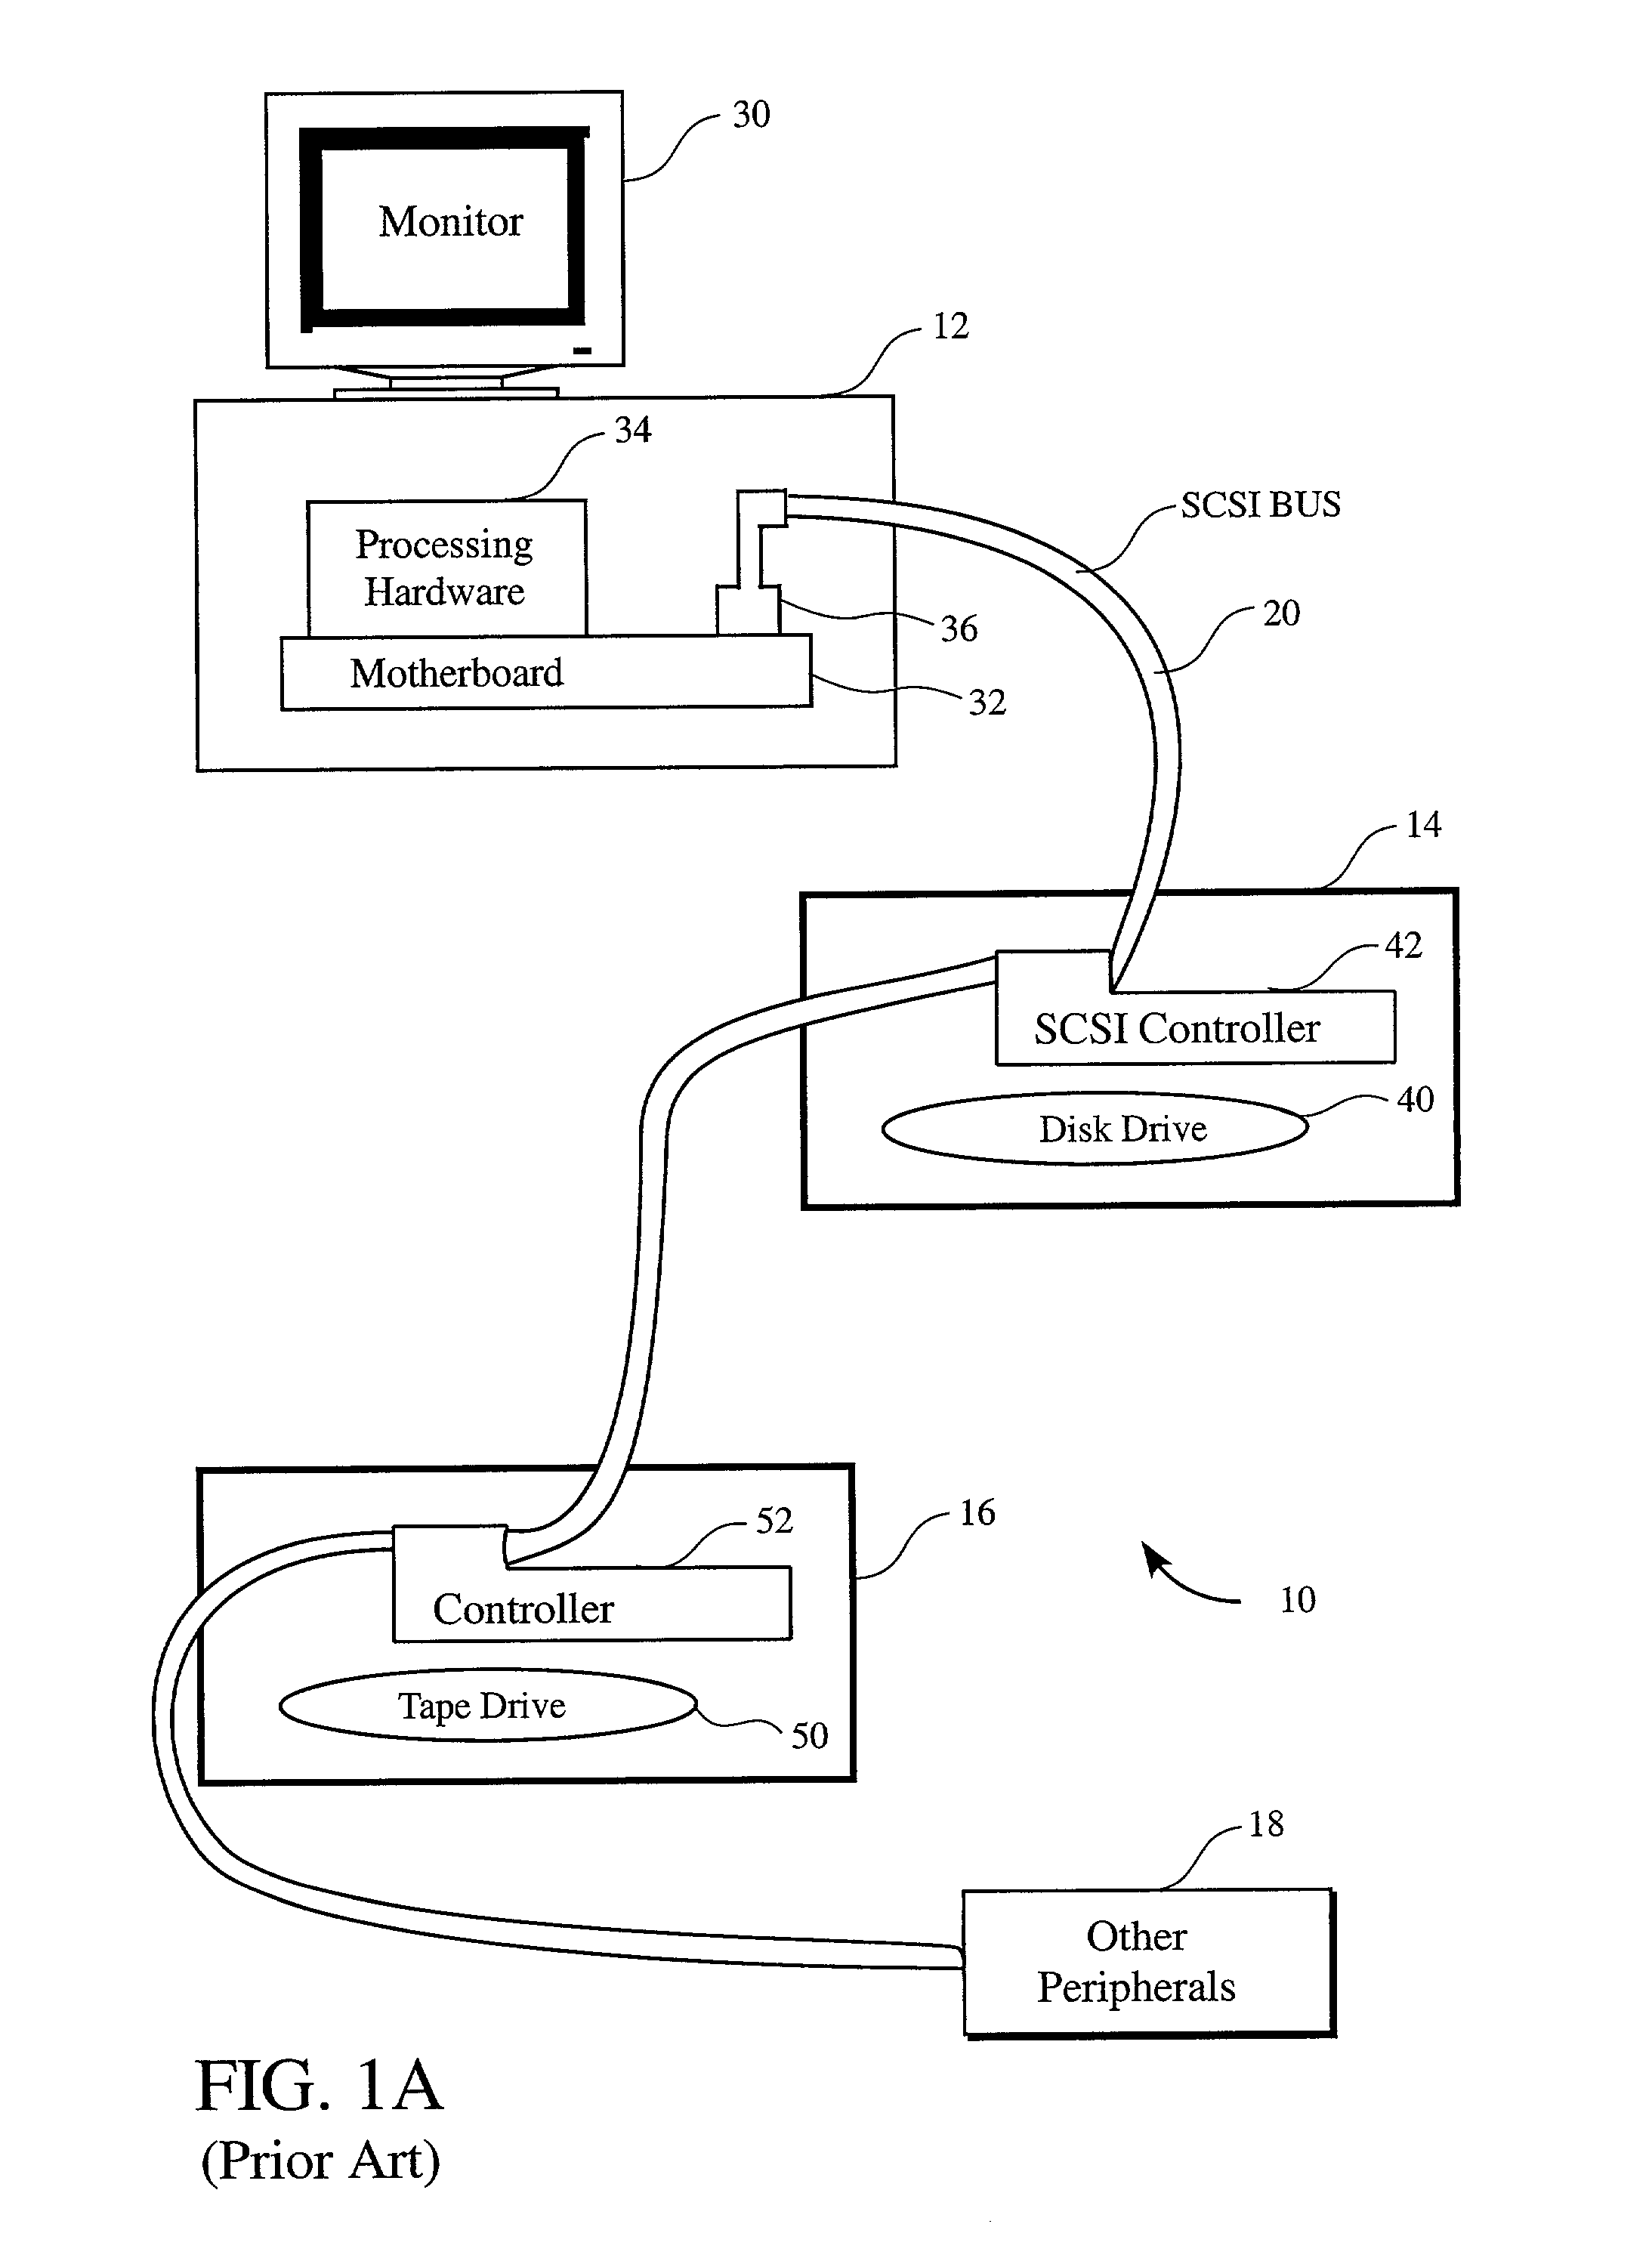 Method to transmit bits of data over a bus